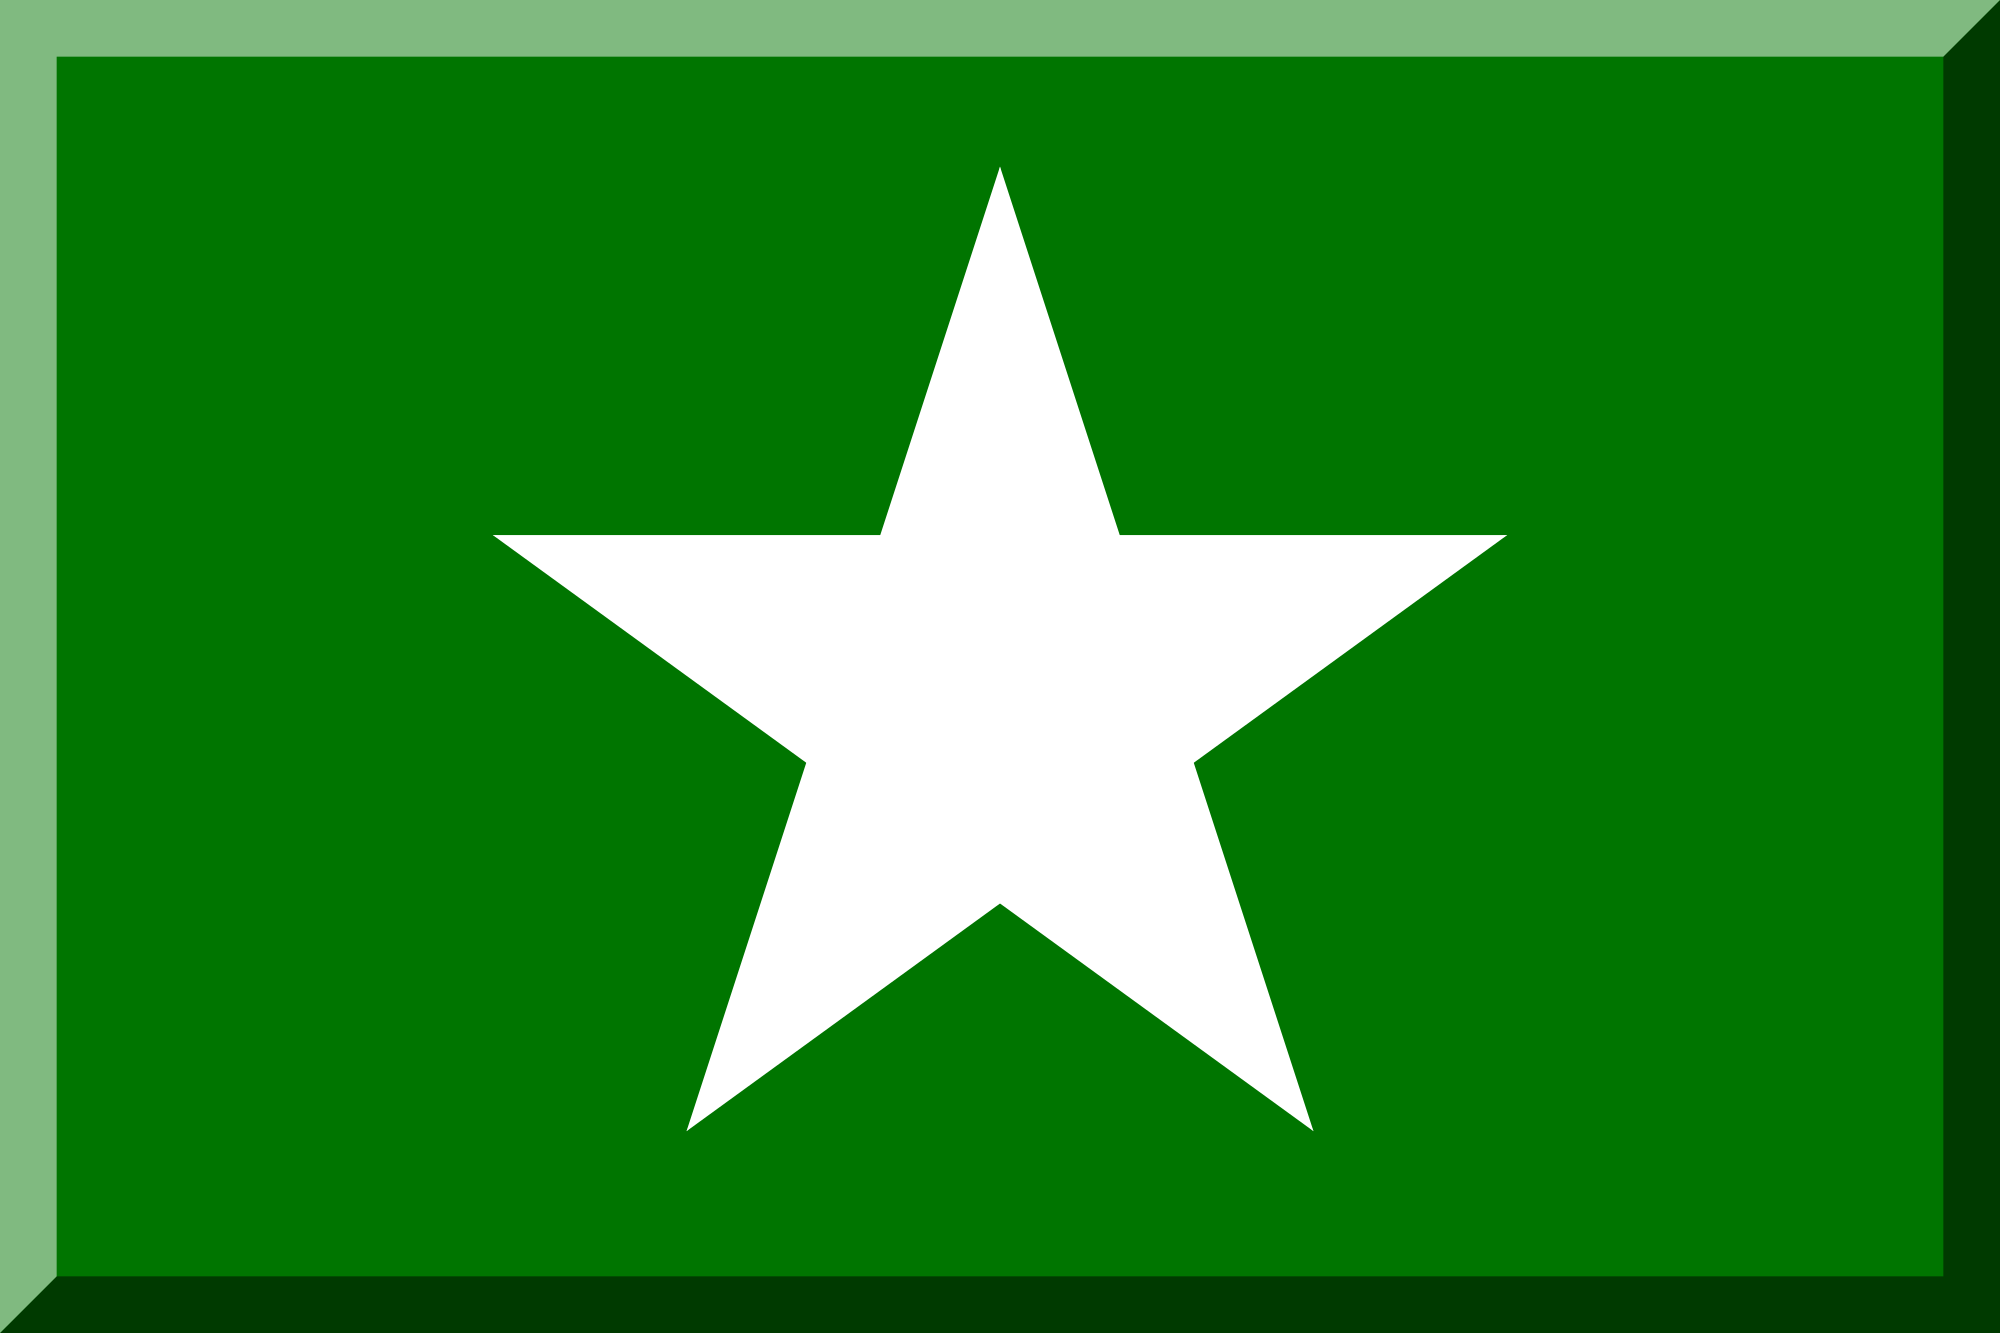 Blue Green with White Star Logo - Green rectangle with white star.svg